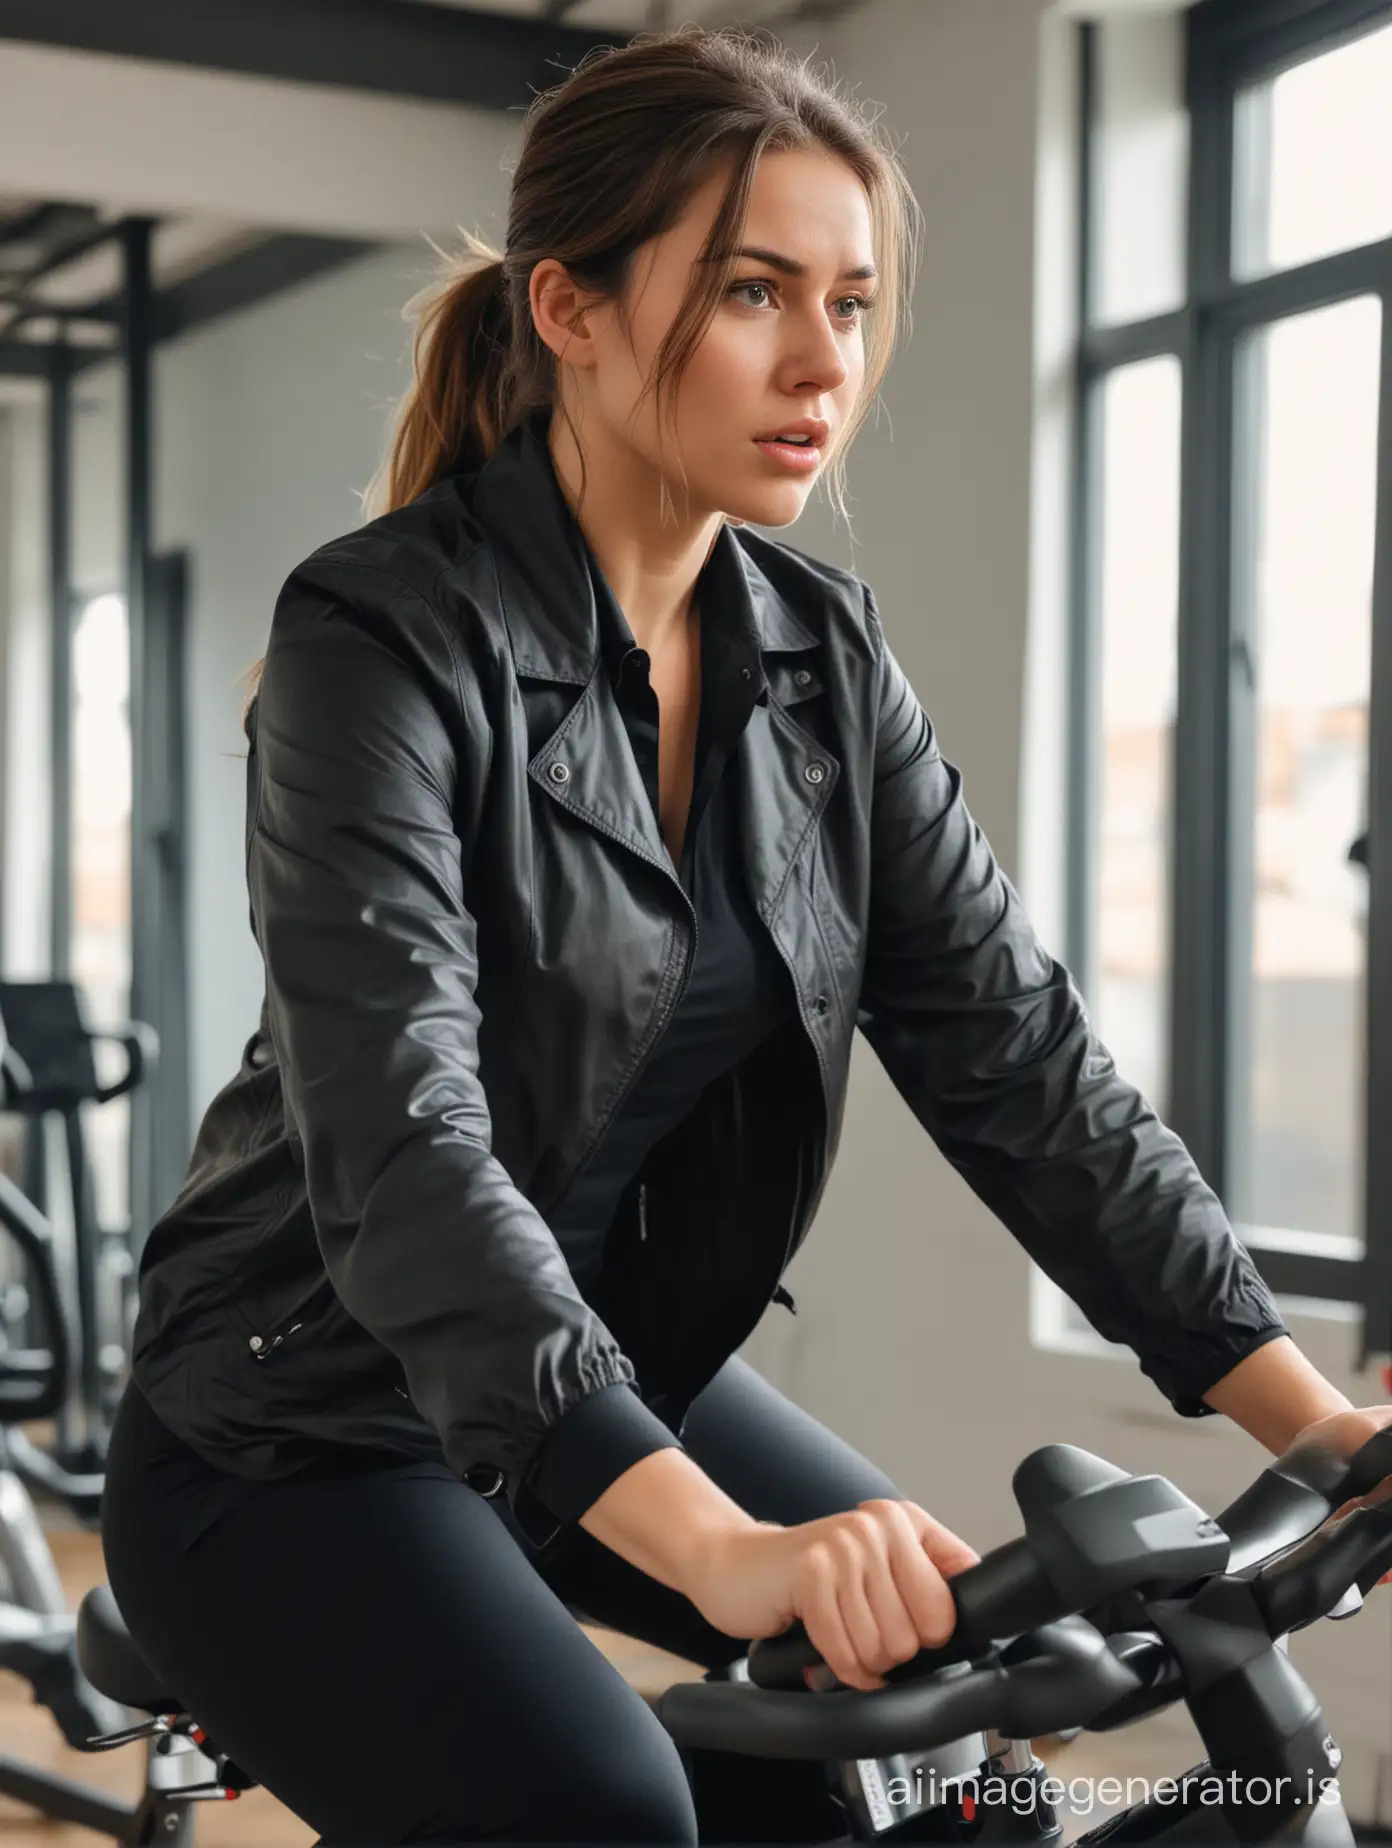 Very worried, young, sweaty, large butt, collared woman riding exercise bike in gym, wearing black jacket, black pants and collar.